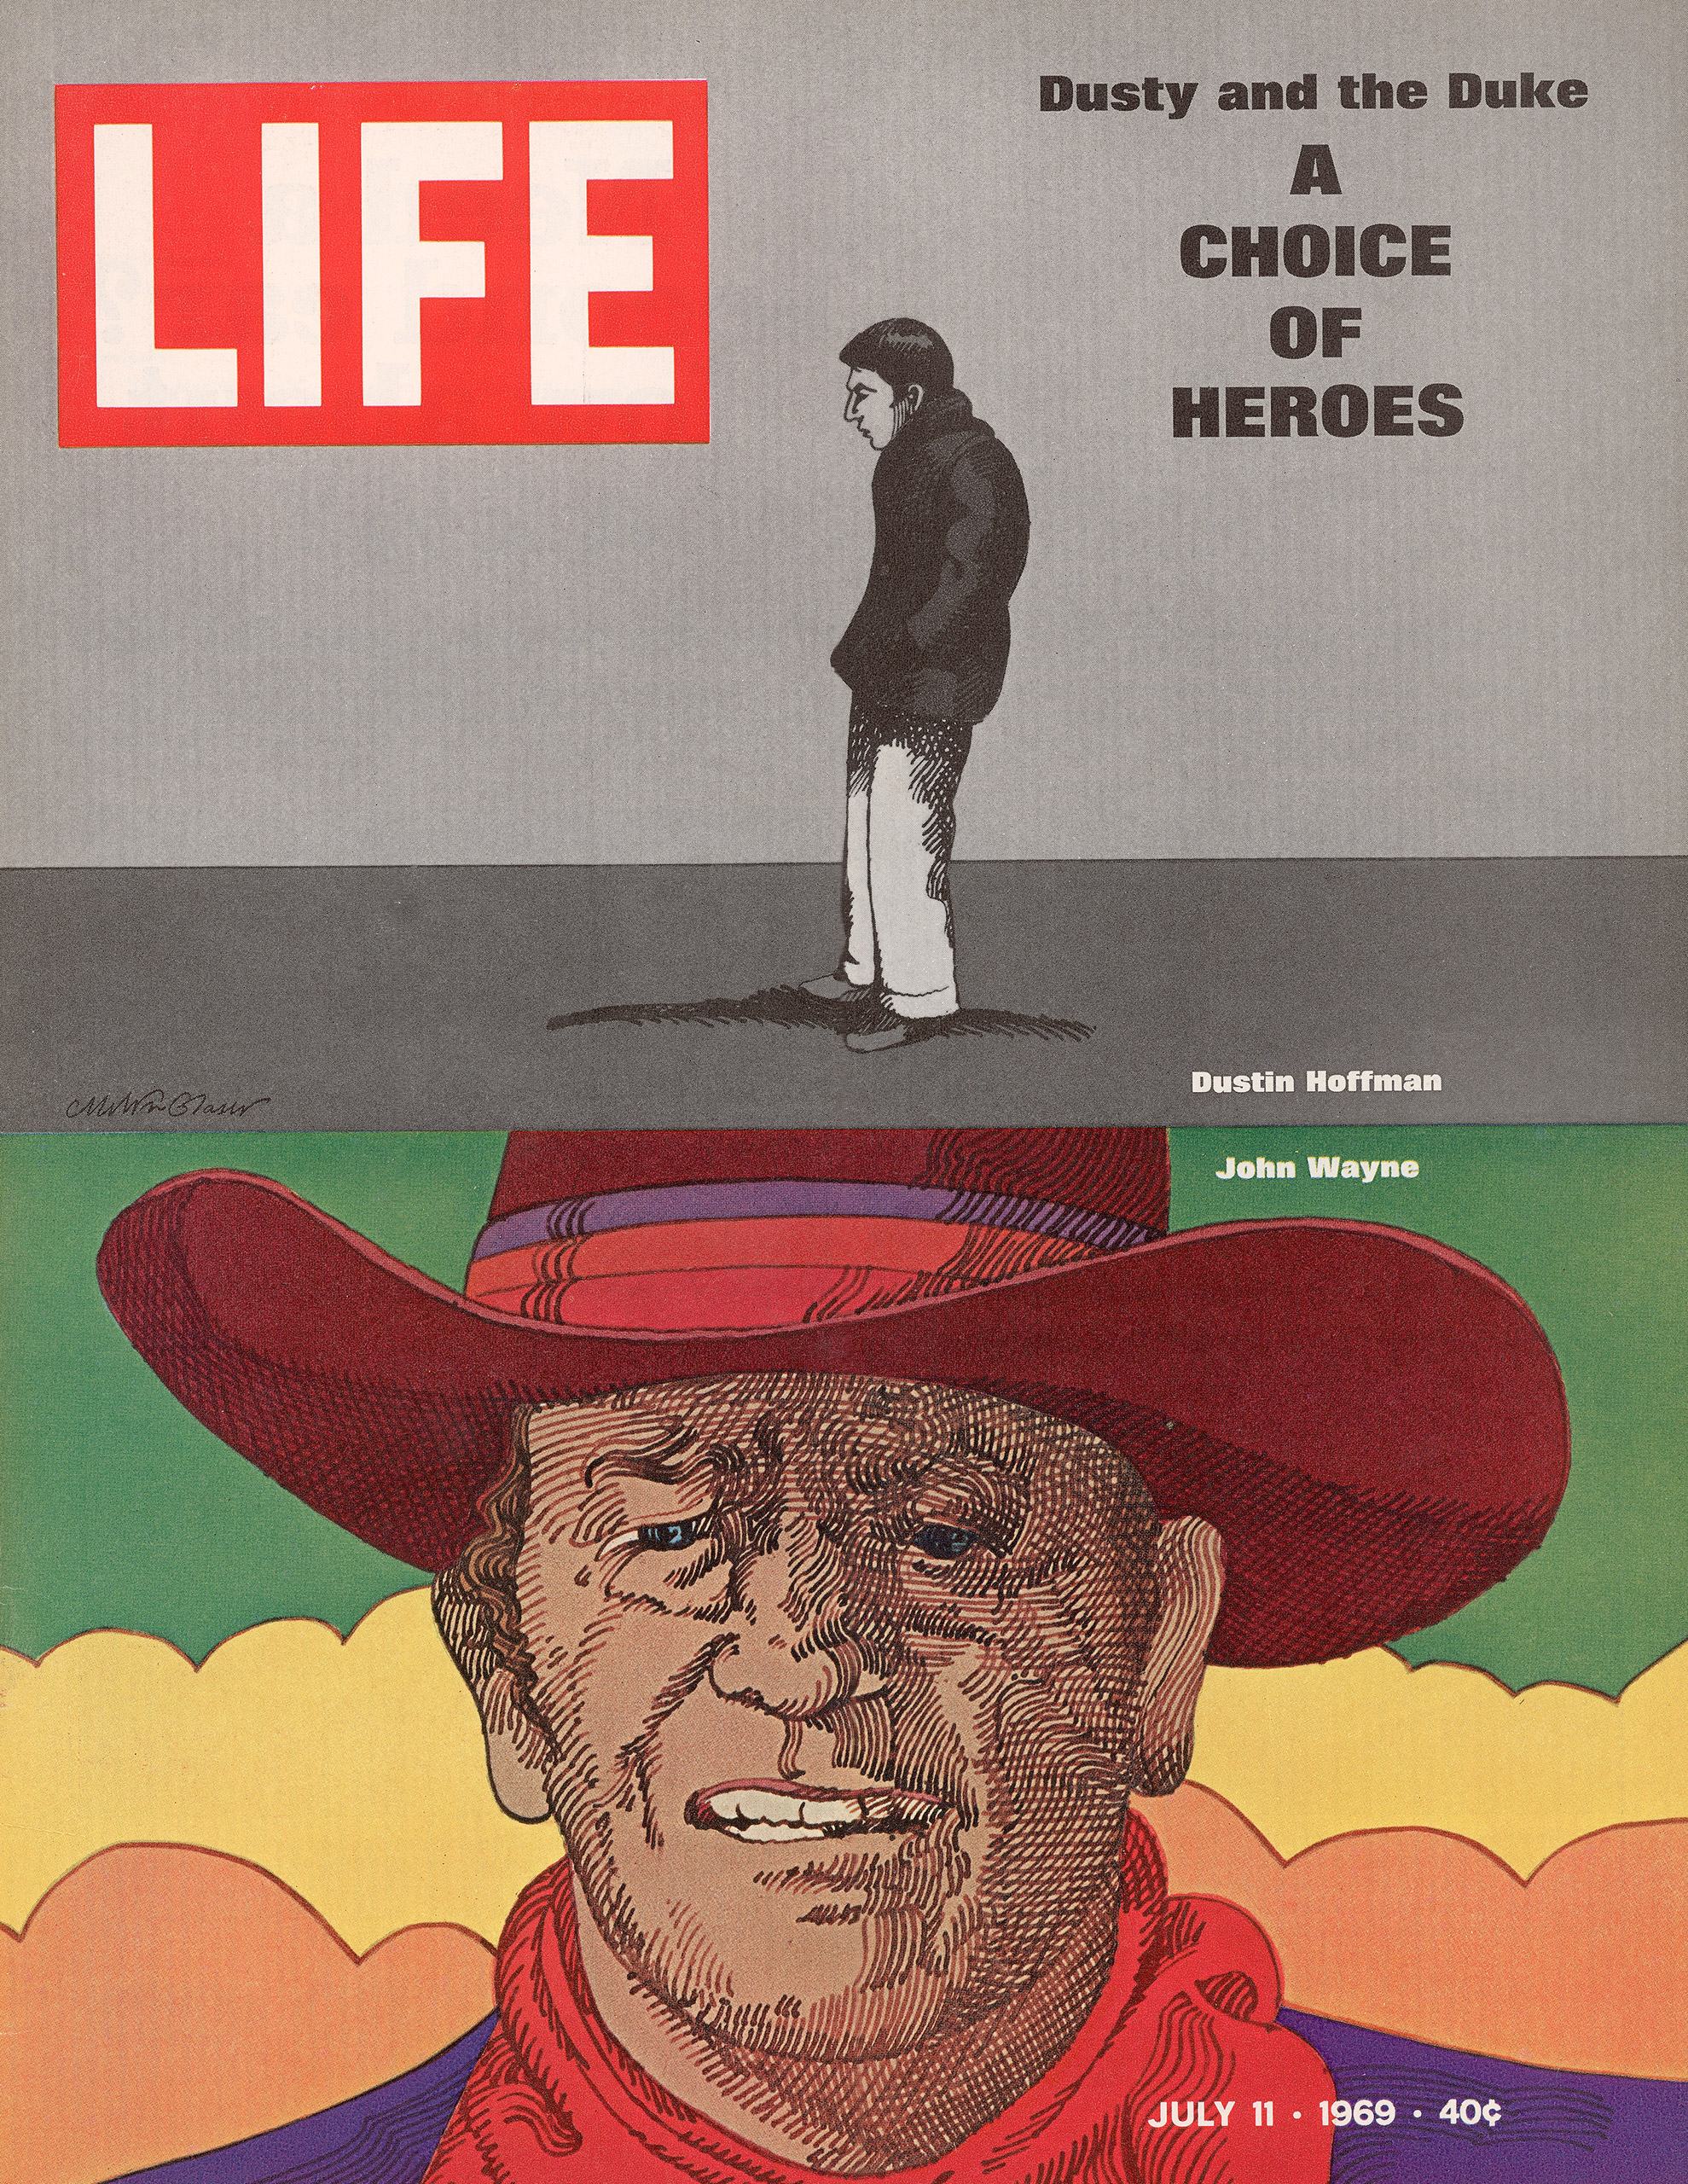 July 11, 1969 cover of LIFE magazine. Illustration by Milton Glaser.